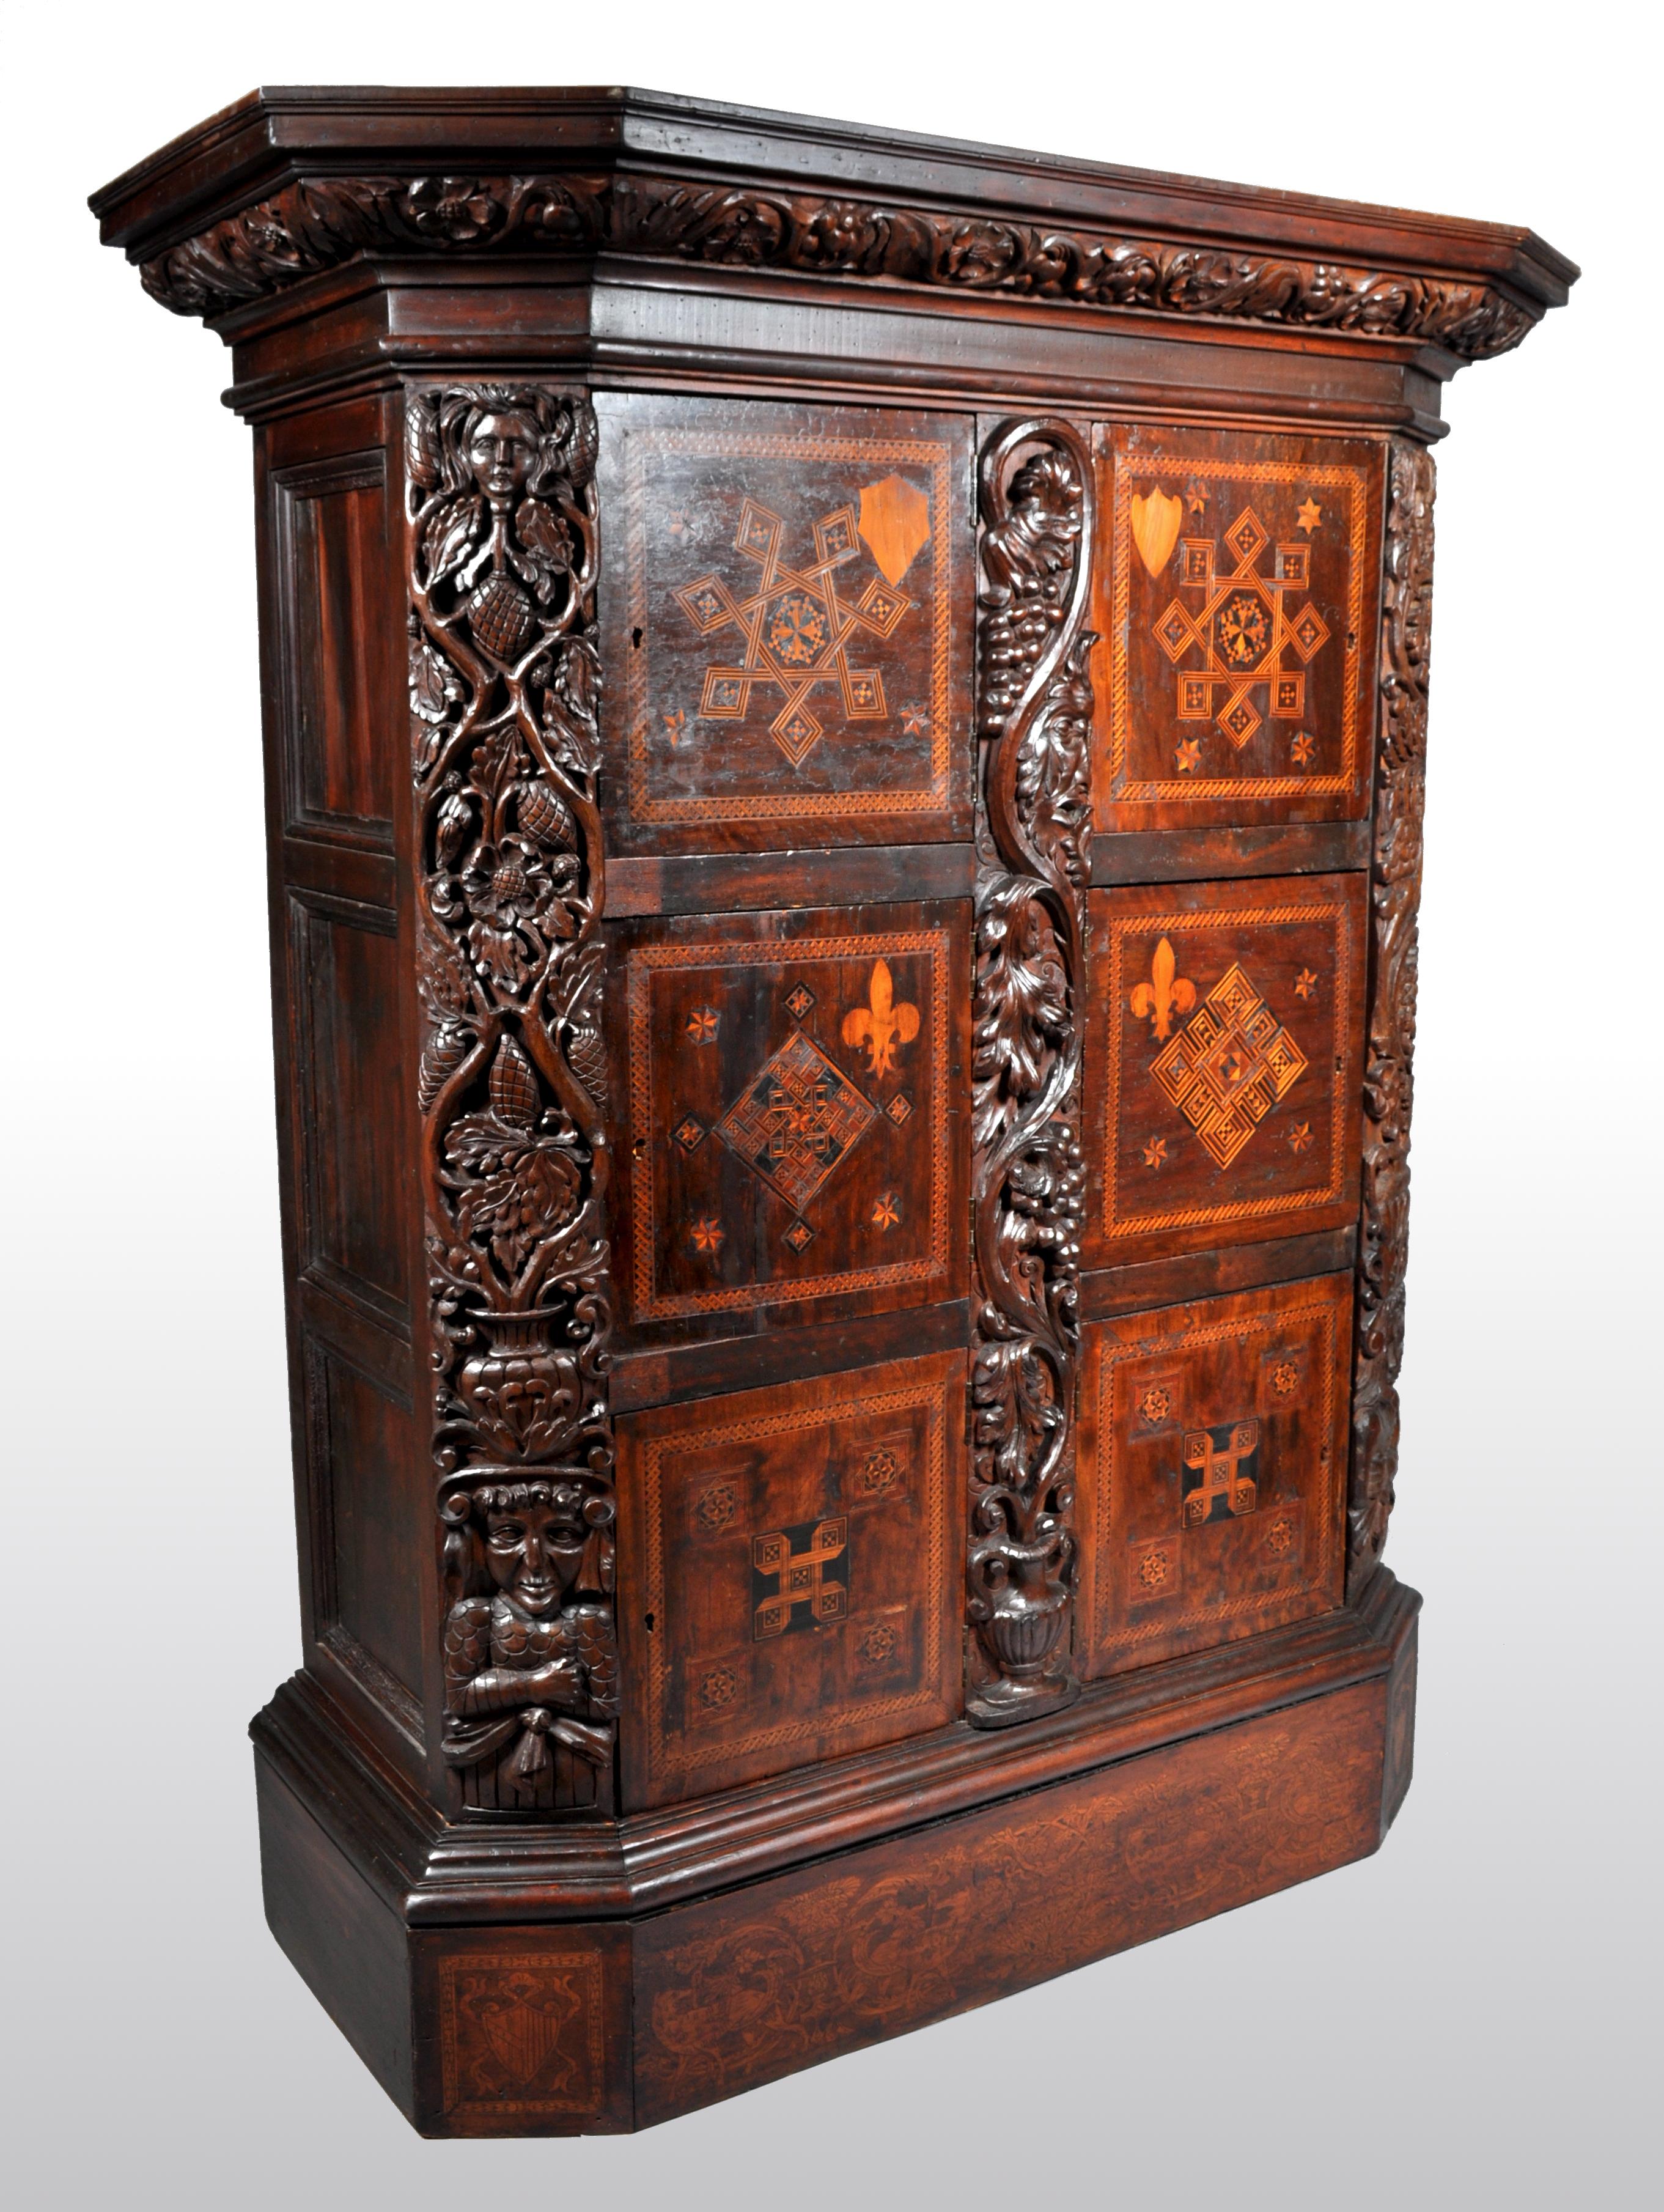 Antique Flemish / Dutch walnut marquetry Royal Manuscript cabinet, circa 1680. The cabinet possessing a stepped cornice with a carved frieze of fruiting vines. Below there are six doors which are finely inlaid with fruitwood and satinwood geometric